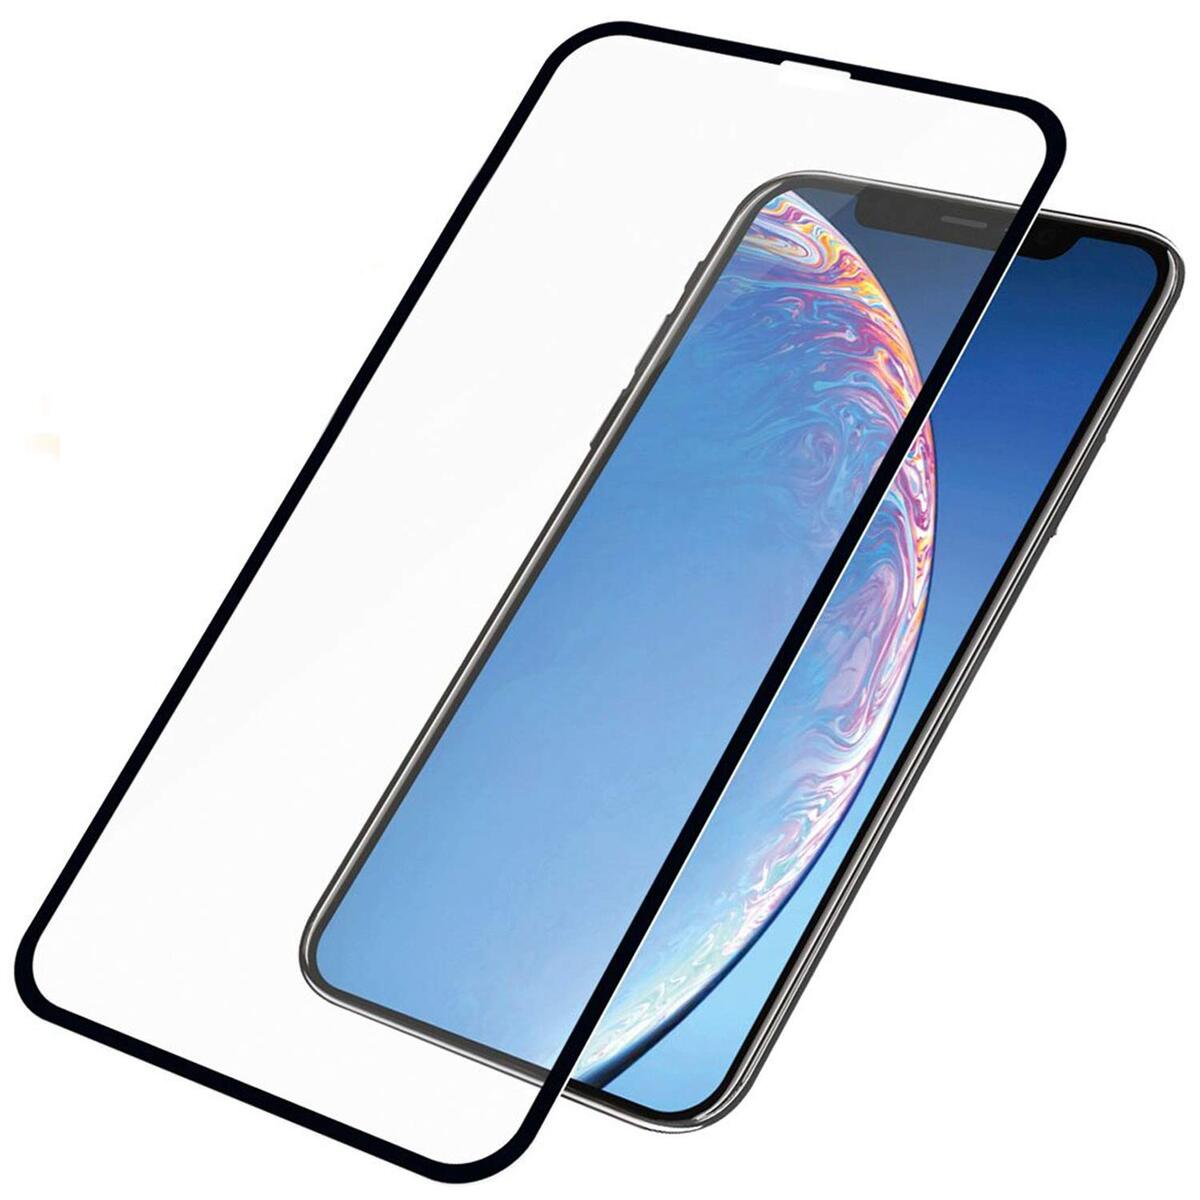 Panzerglass Edge To Edge Black Frame Screen Protector For Iphone 11 Pro Max, 6.5-inch